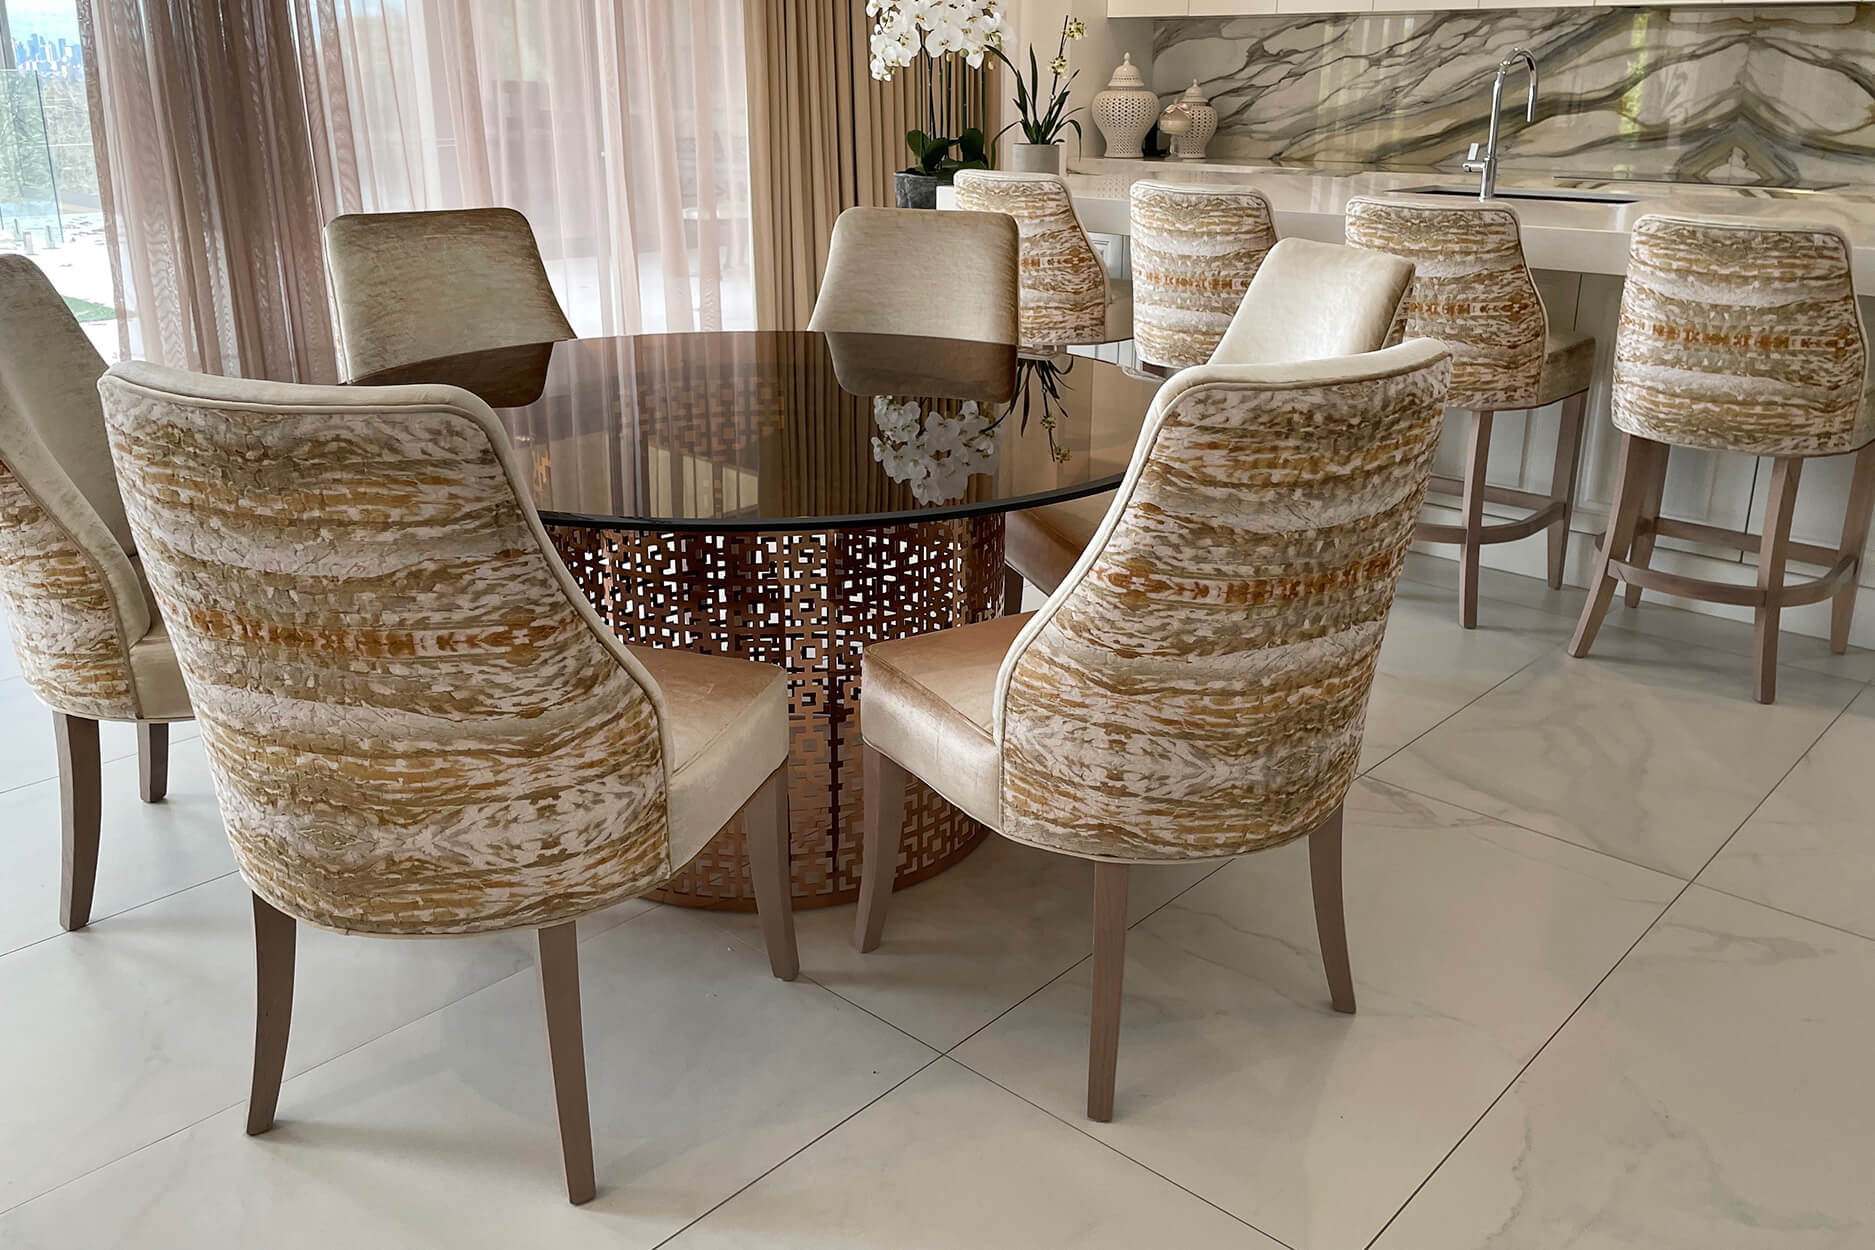 Australian Made Bespoke Dining Chairs & Stools | French Tables